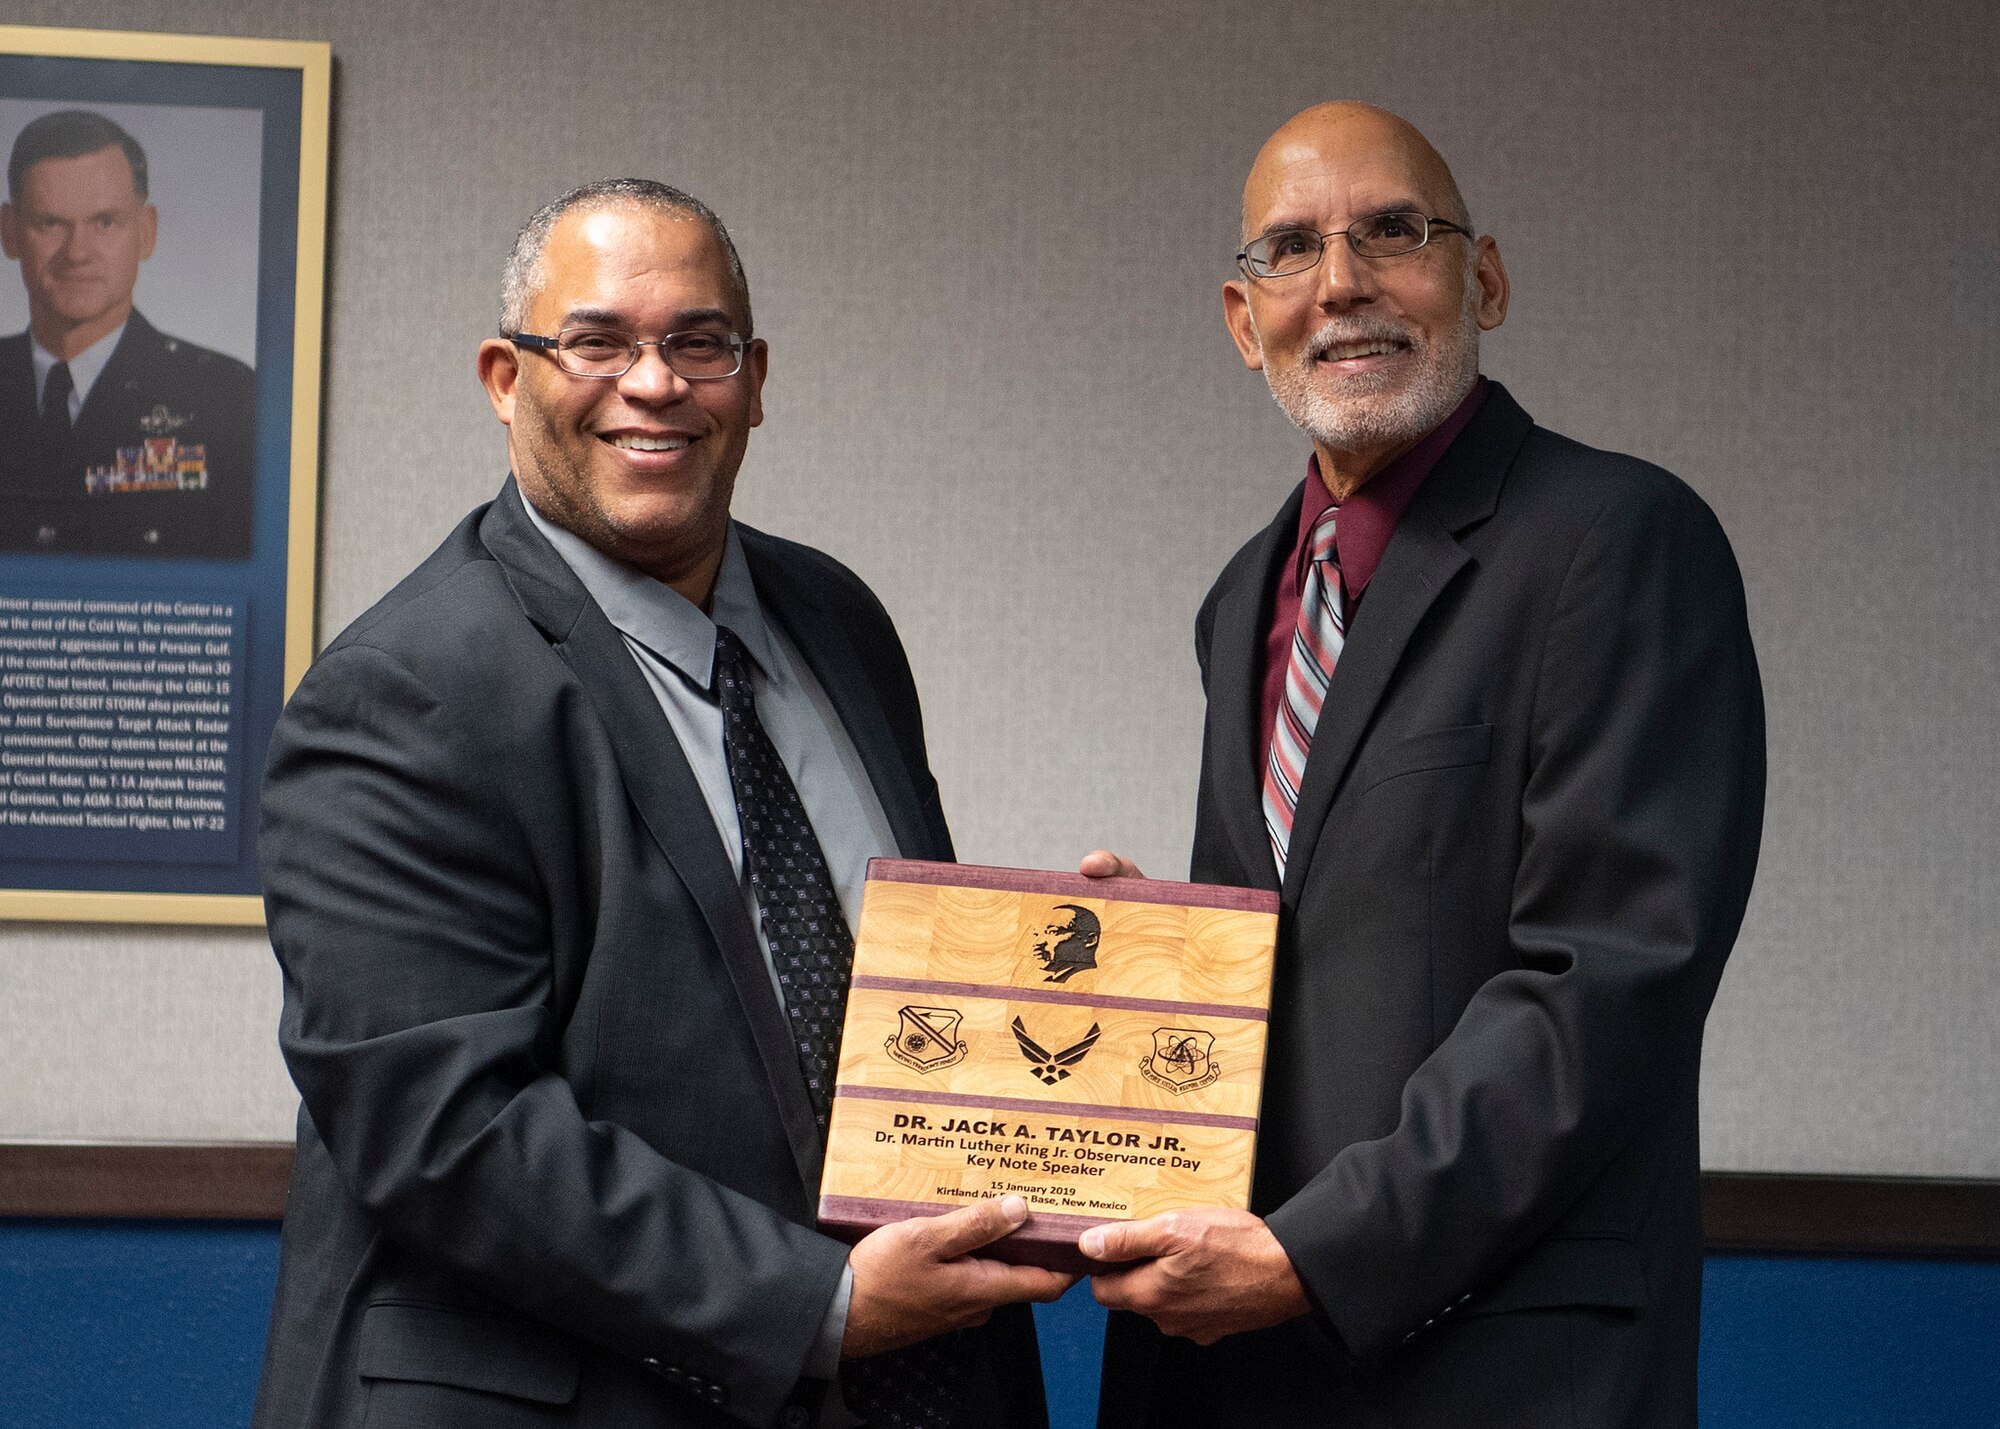 Lt. Col. (Ret.) Jeffrey Fason, Air Force Nuclear Weapon Center program manager, presents Dr. Jack A. Taylor Jr., with a memento for being the guest speaker at the Dr. Martin Luther King Jr. Observance ceremony at Kirtland Air Force Base, N.M., Jan. 15, 2019. Dr. Taylor spoke on the theme of this year’s MLK day, “Where do we go from here: a tradition of resistance.” (U.S. Air Force photo by Staff Sgt. J.D. Strong II)